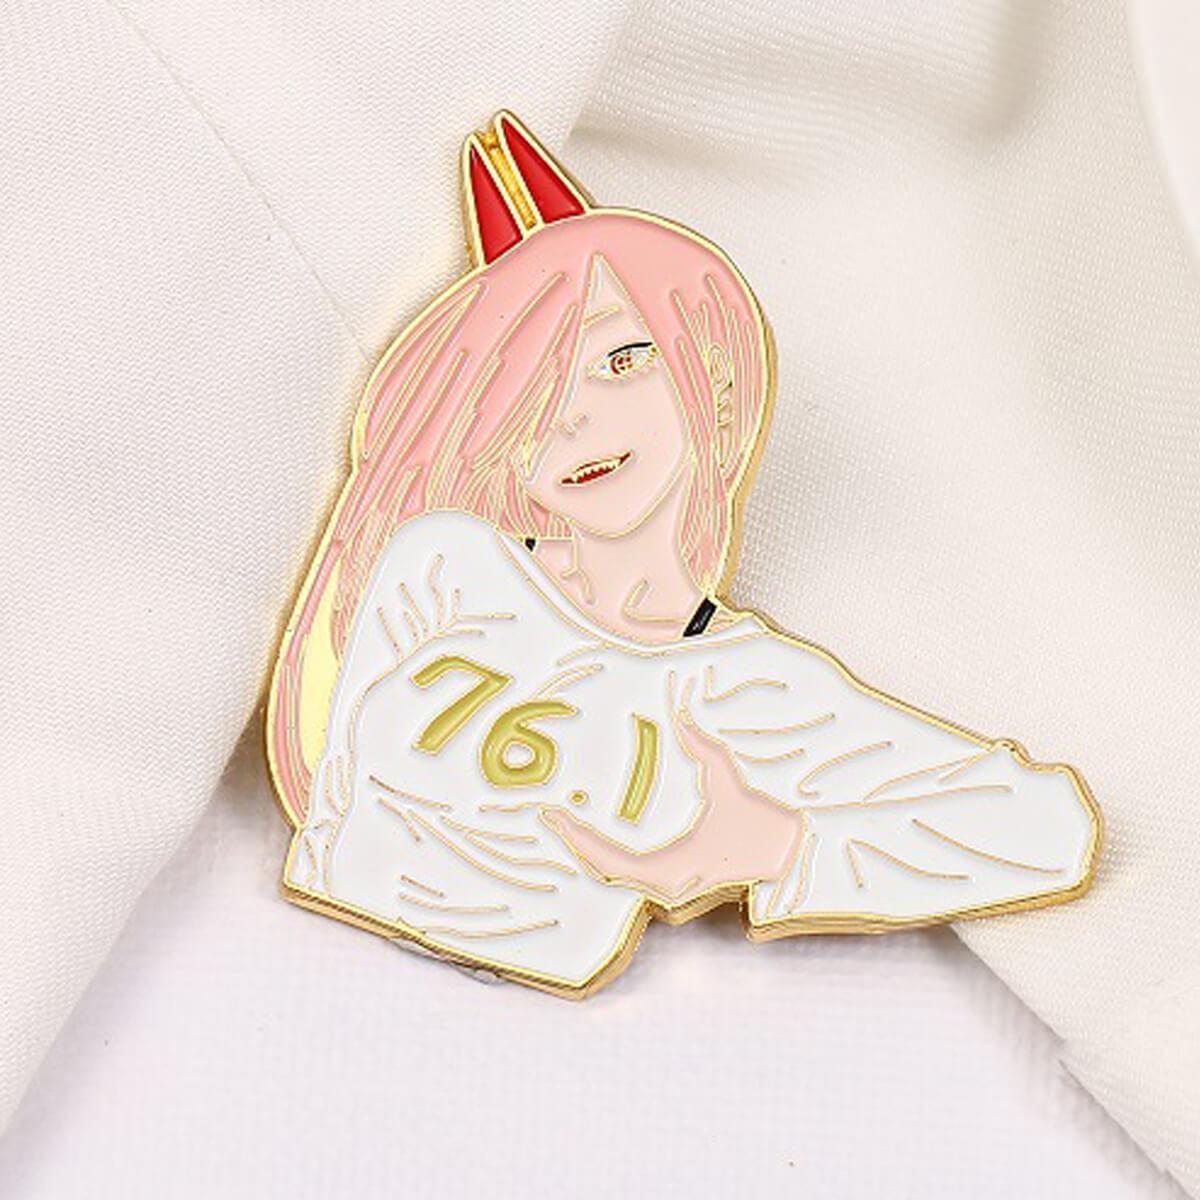 Chainsaw Man Power Breast Enamel Pin - Aesthetic Clothes Shop